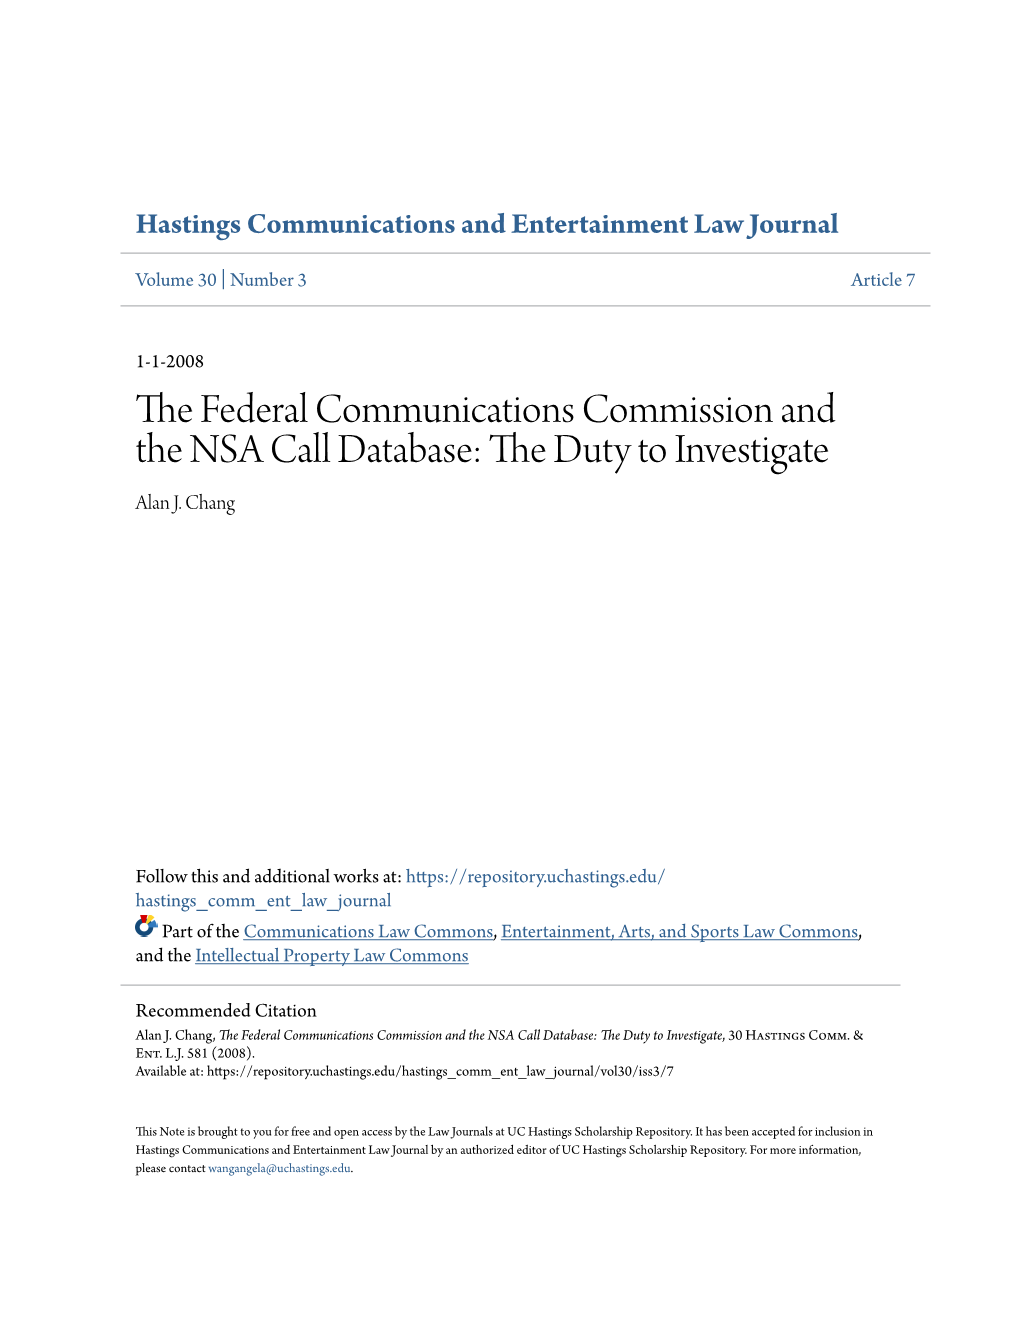 The Federal Communications Commission and the NSA Call Database: the Duty to Investigate, 30 Hastings Comm